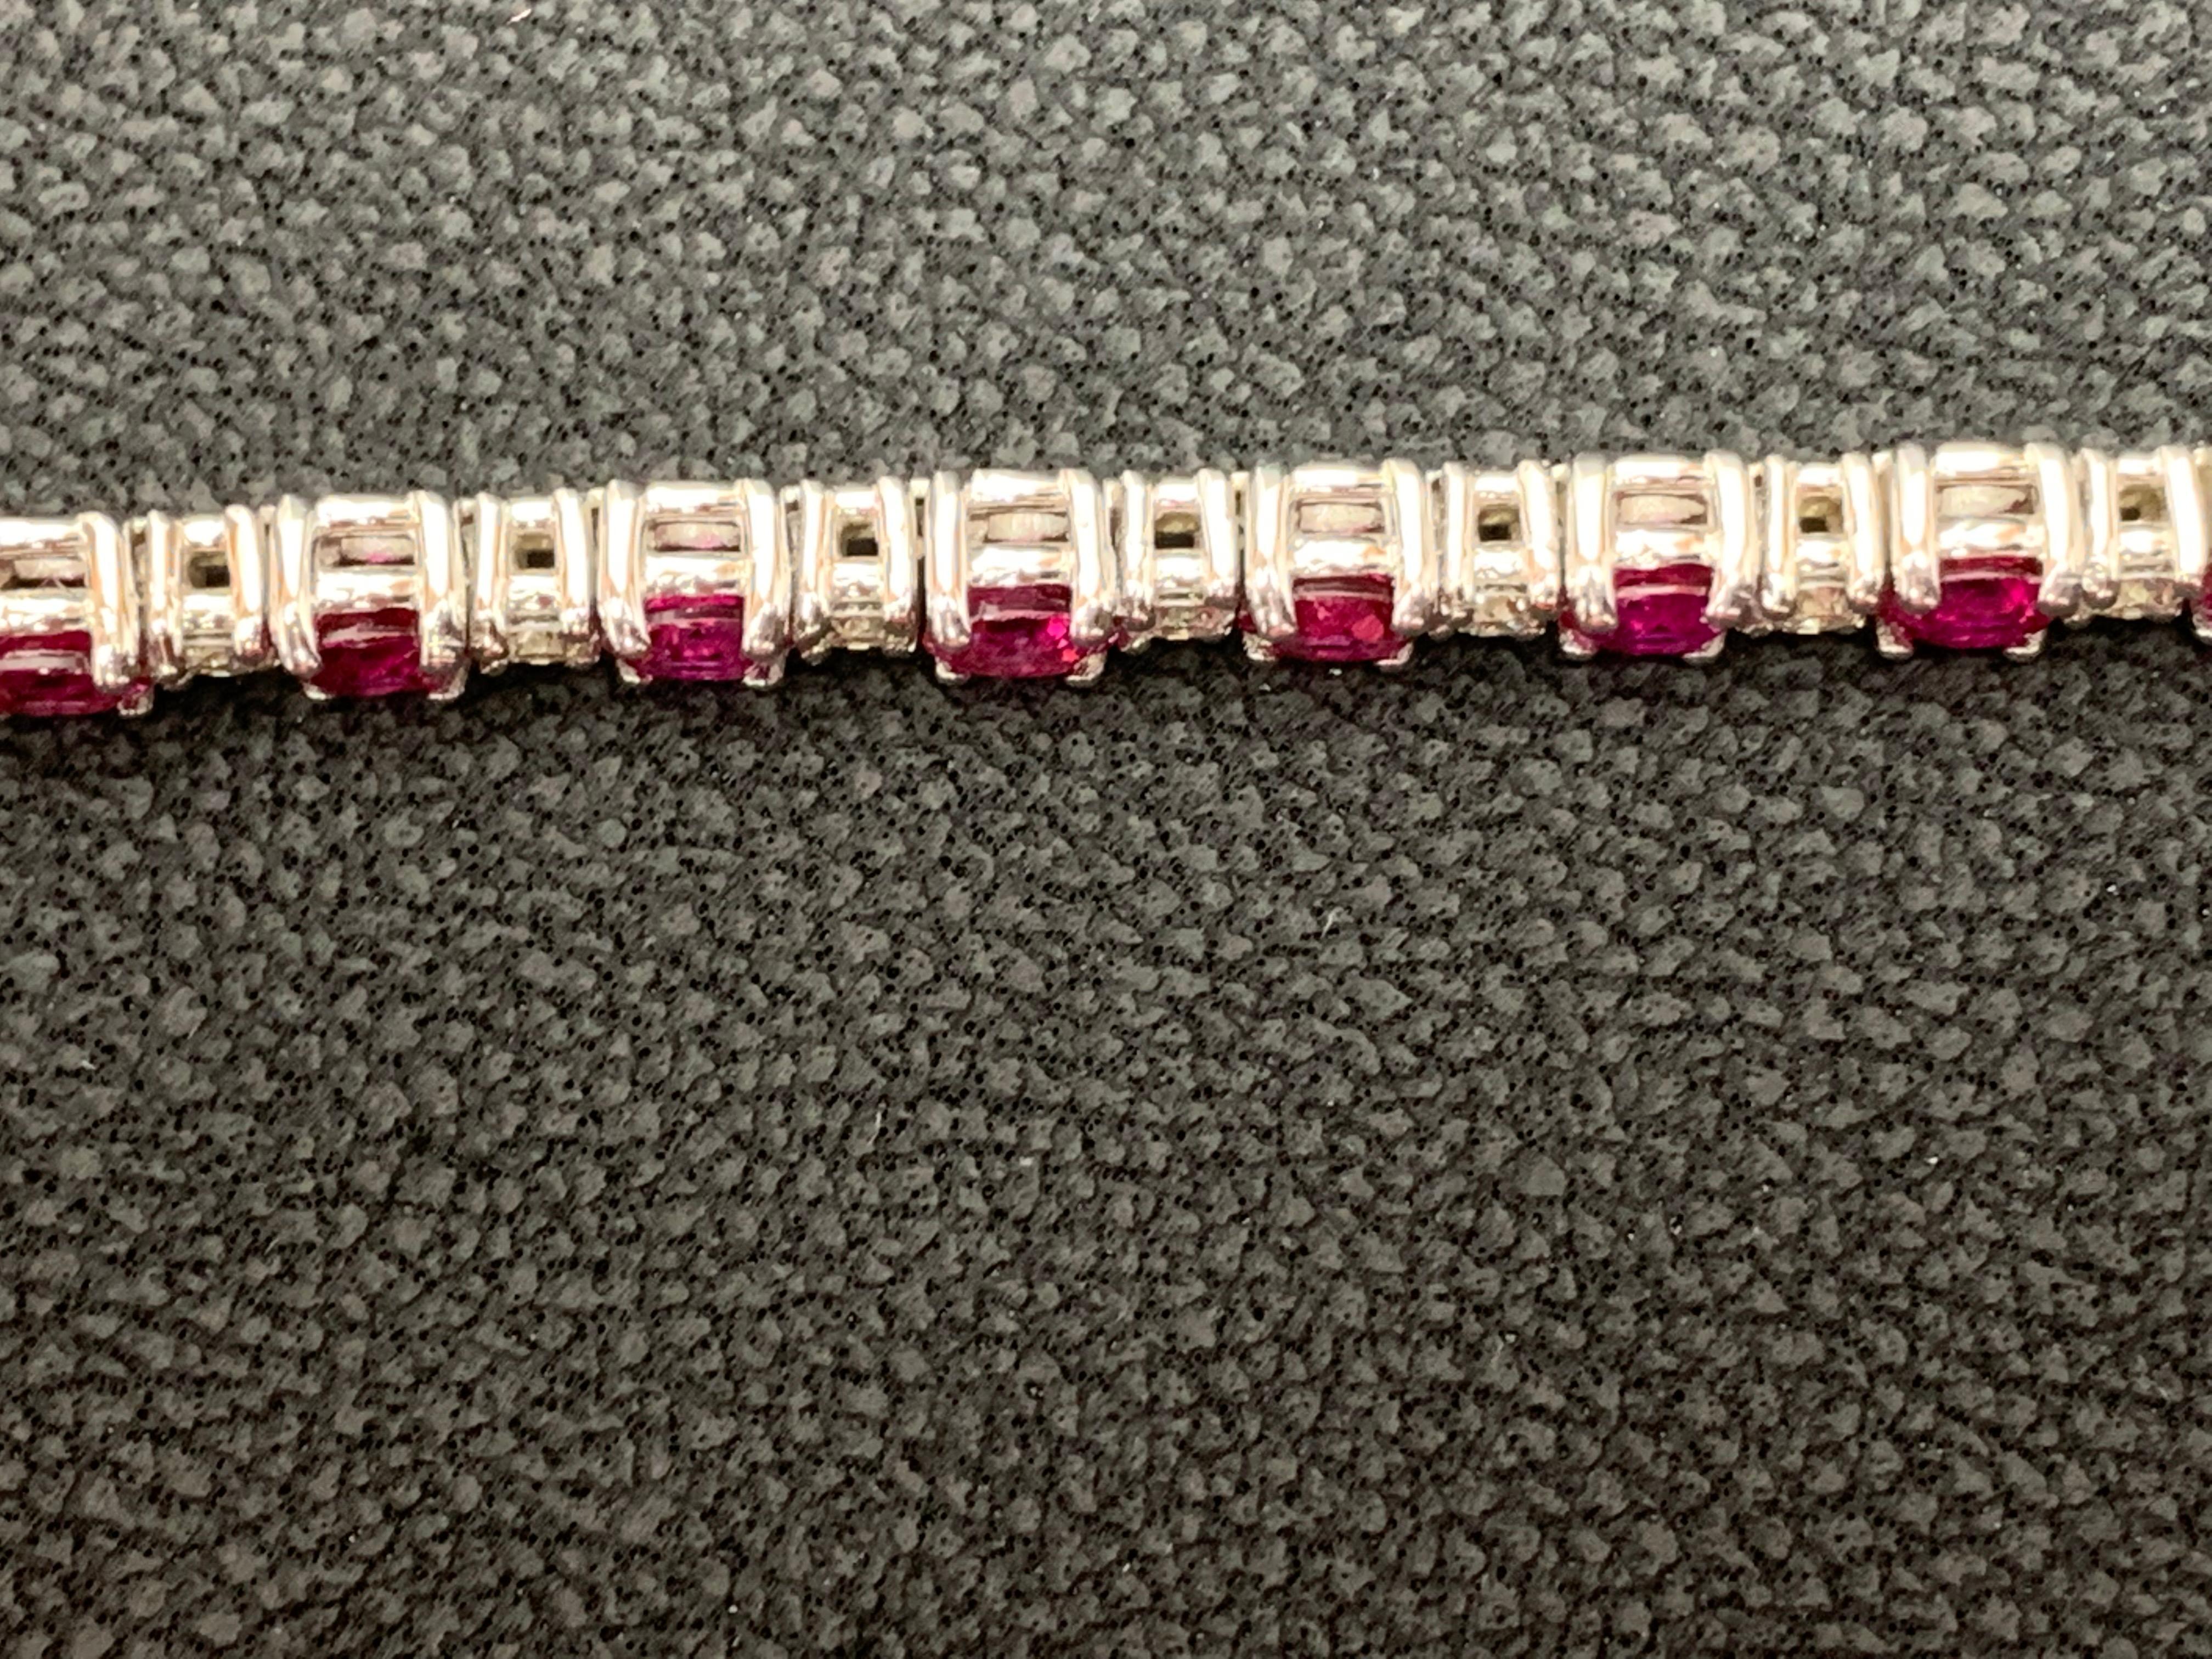 Contemporary 8 Carat Ruby and Diamond Tennis Bracelet in 14K White Gold For Sale